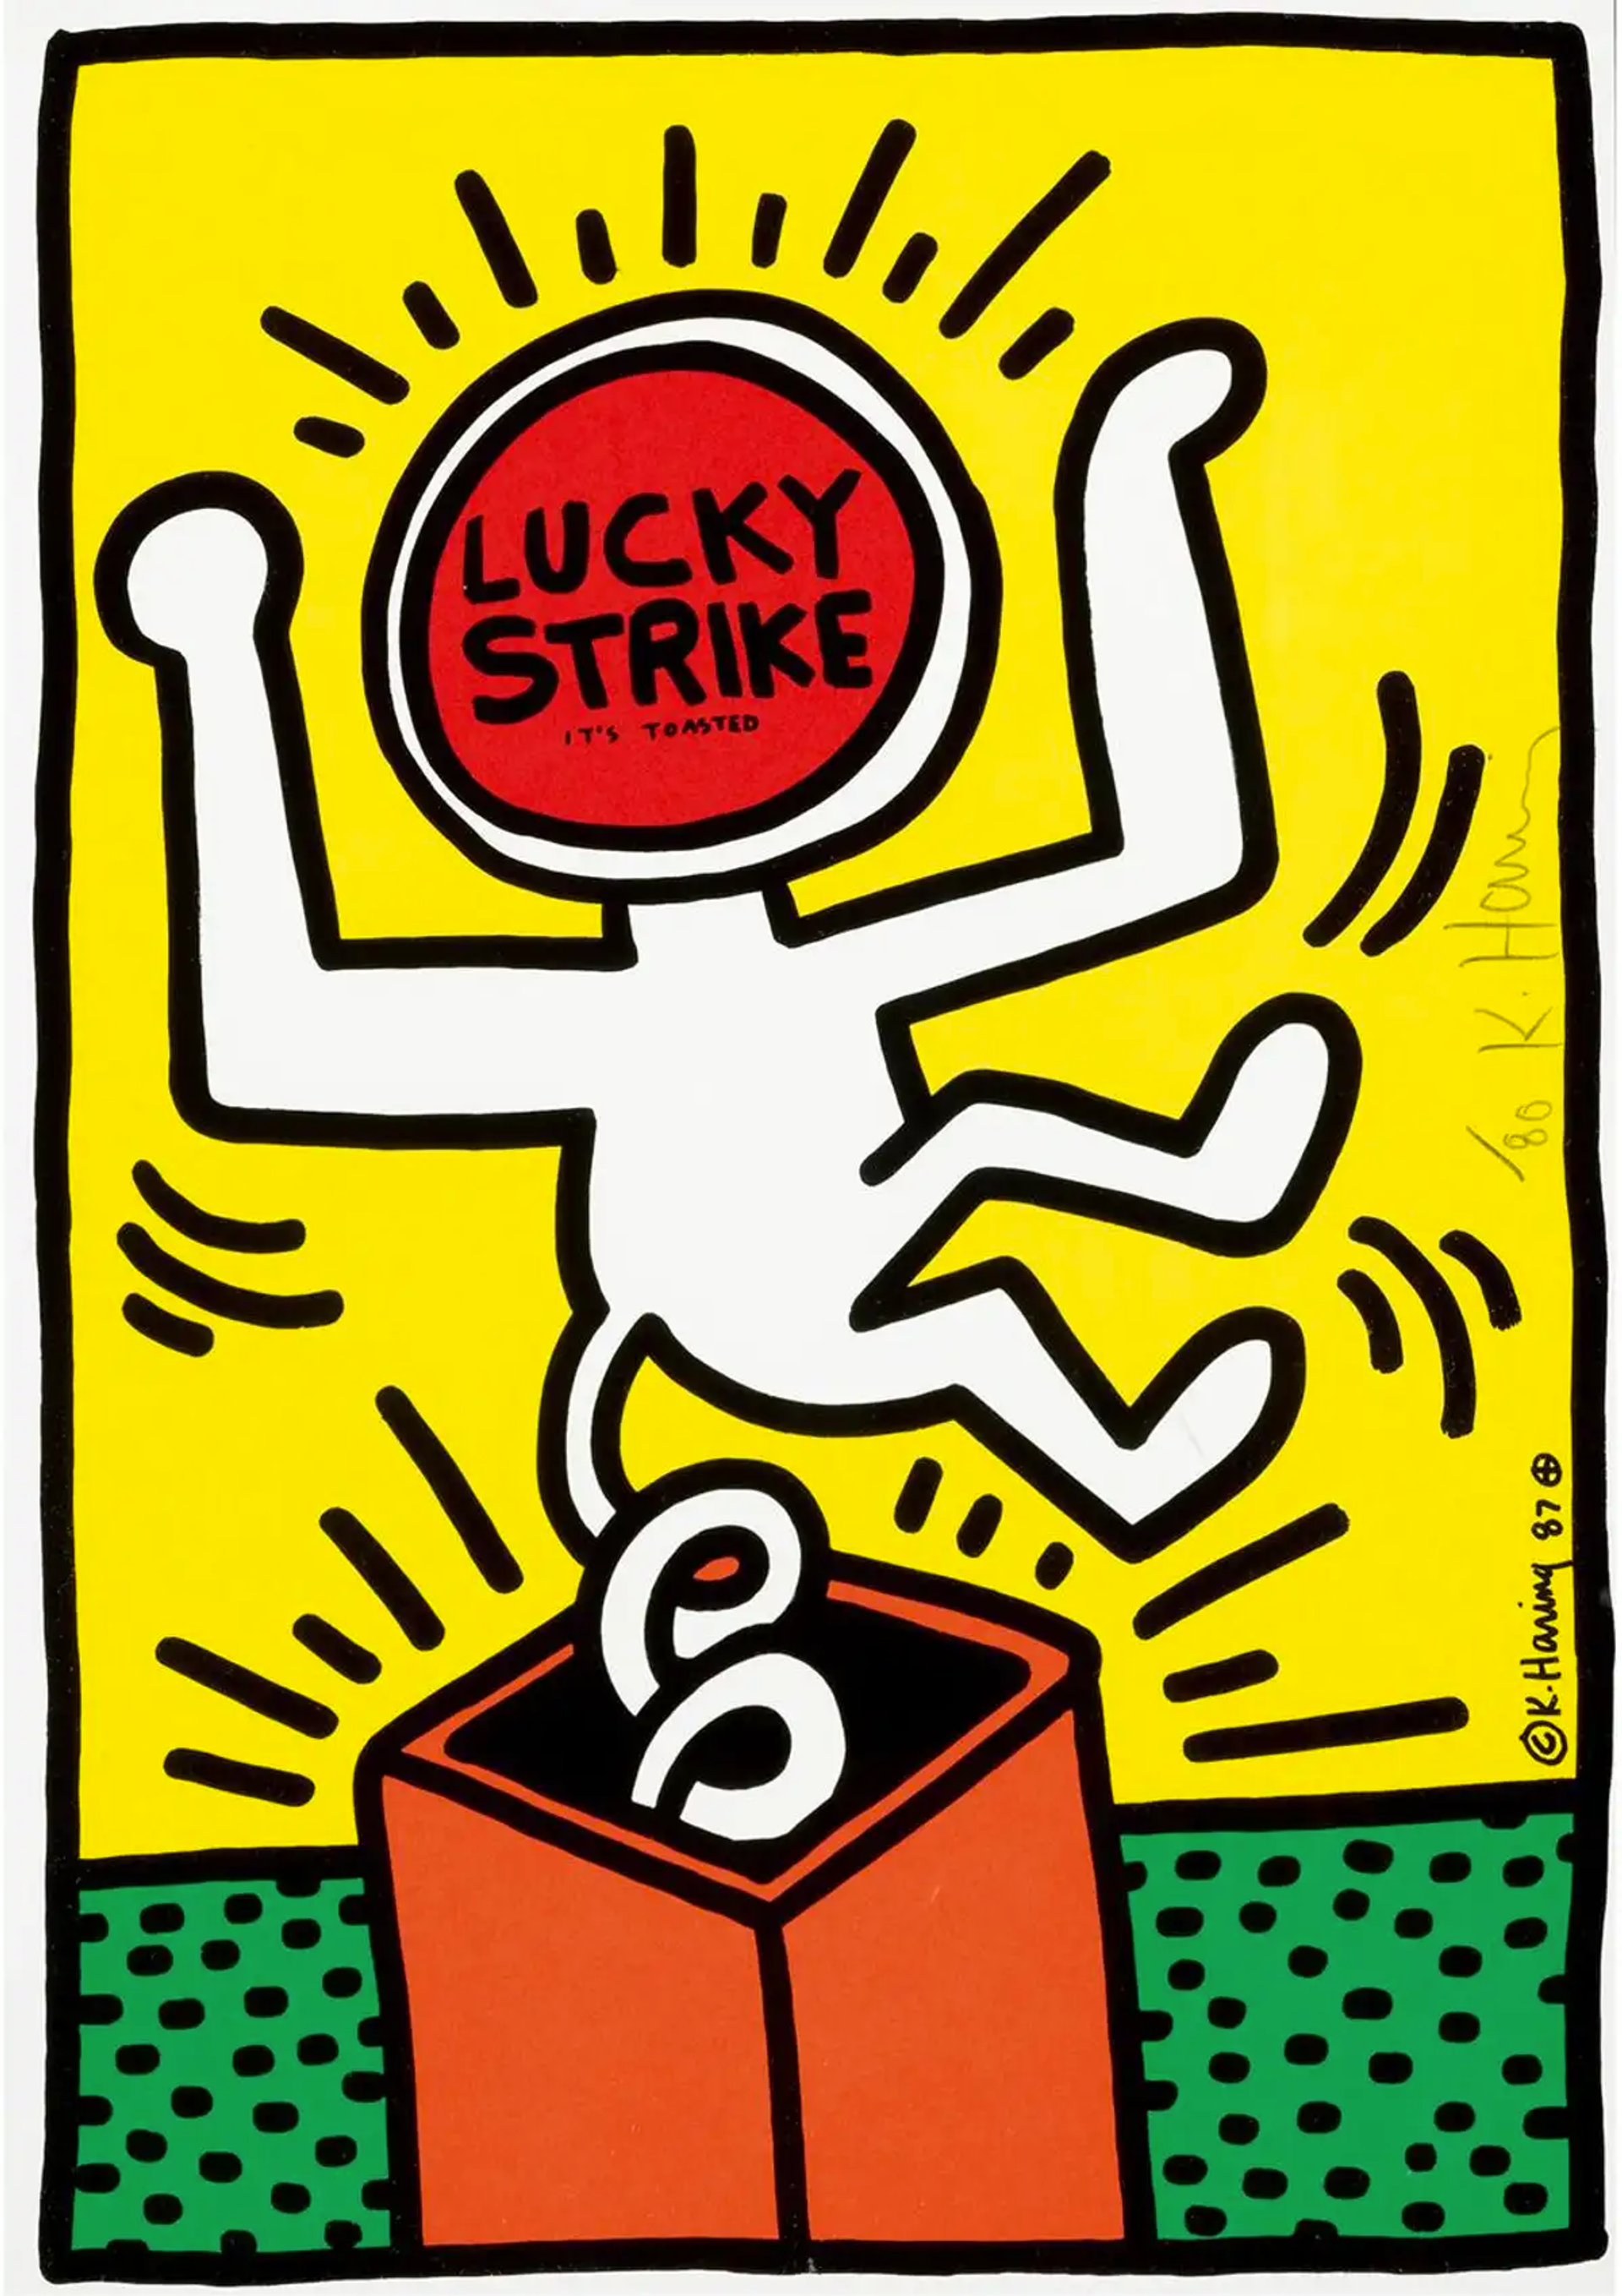 Lucky Strike shows a white dancing figure emerging from a toy box. Its head is replaced by the Lucky Strike logo. The background is composed of a green floor and a yellow wall. The print is signed on the right side.